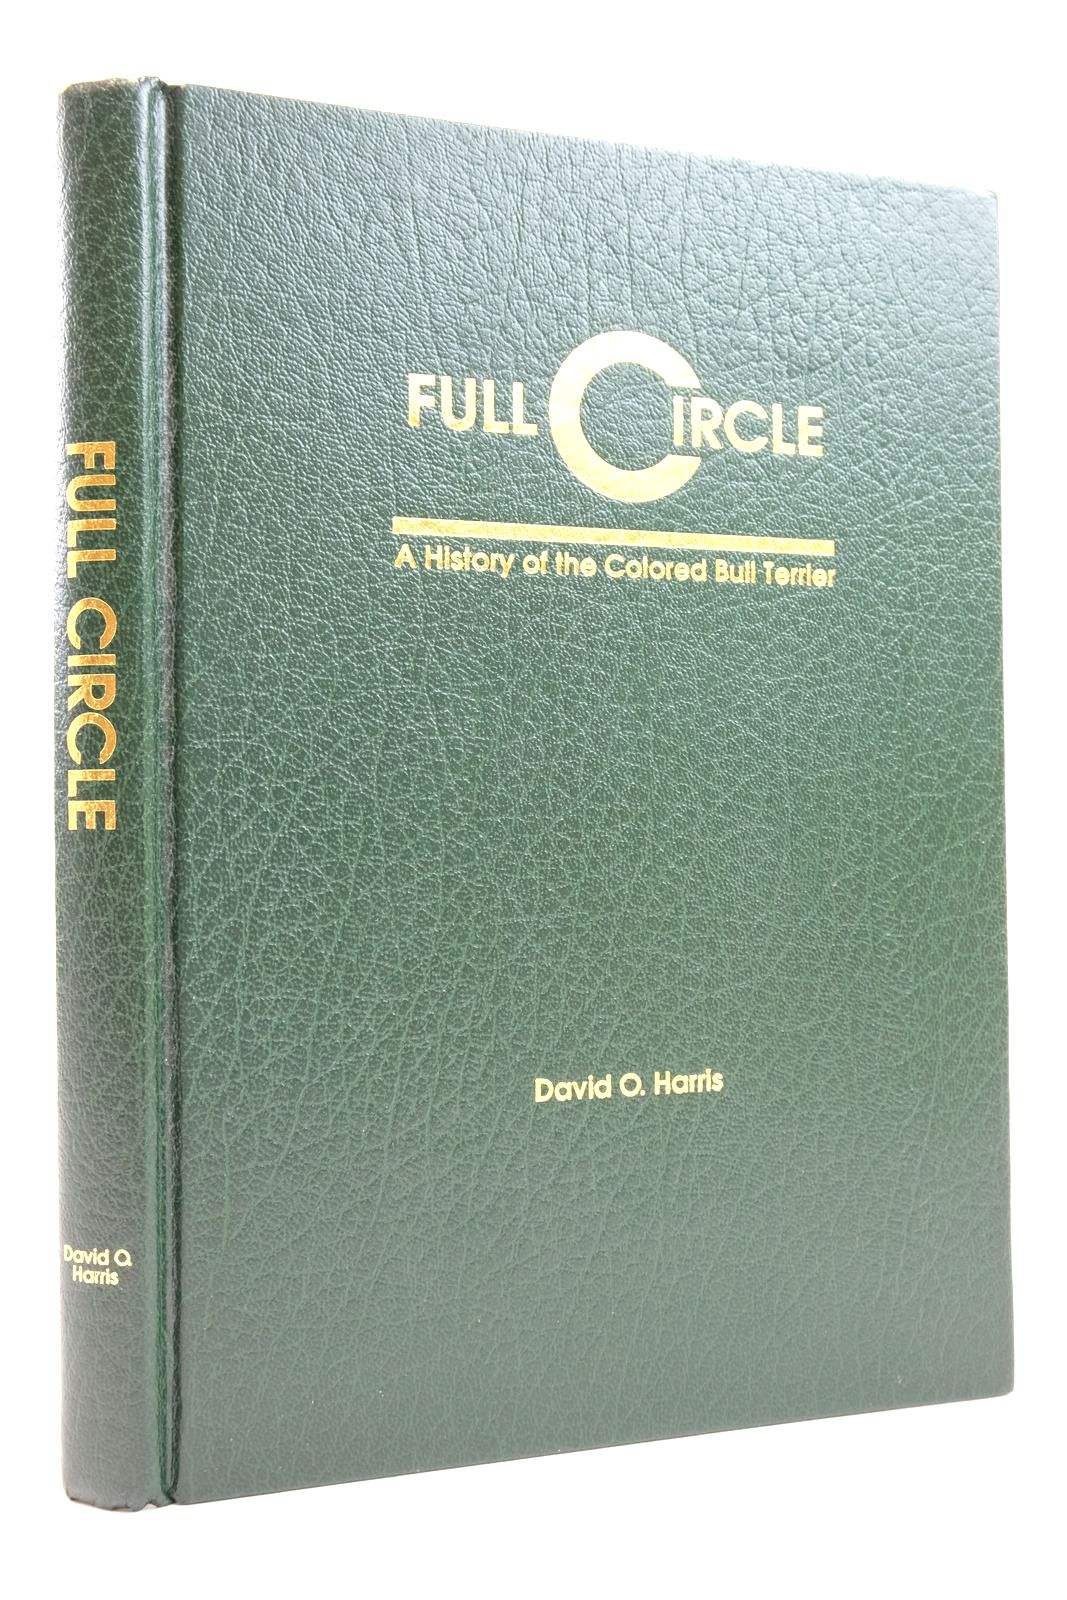 Photo of FULL CIRCLE: A HISTORY OF THE COLORED BULL TERRIER written by Harris, David O. published by David Harris (STOCK CODE: 2136933)  for sale by Stella & Rose's Books